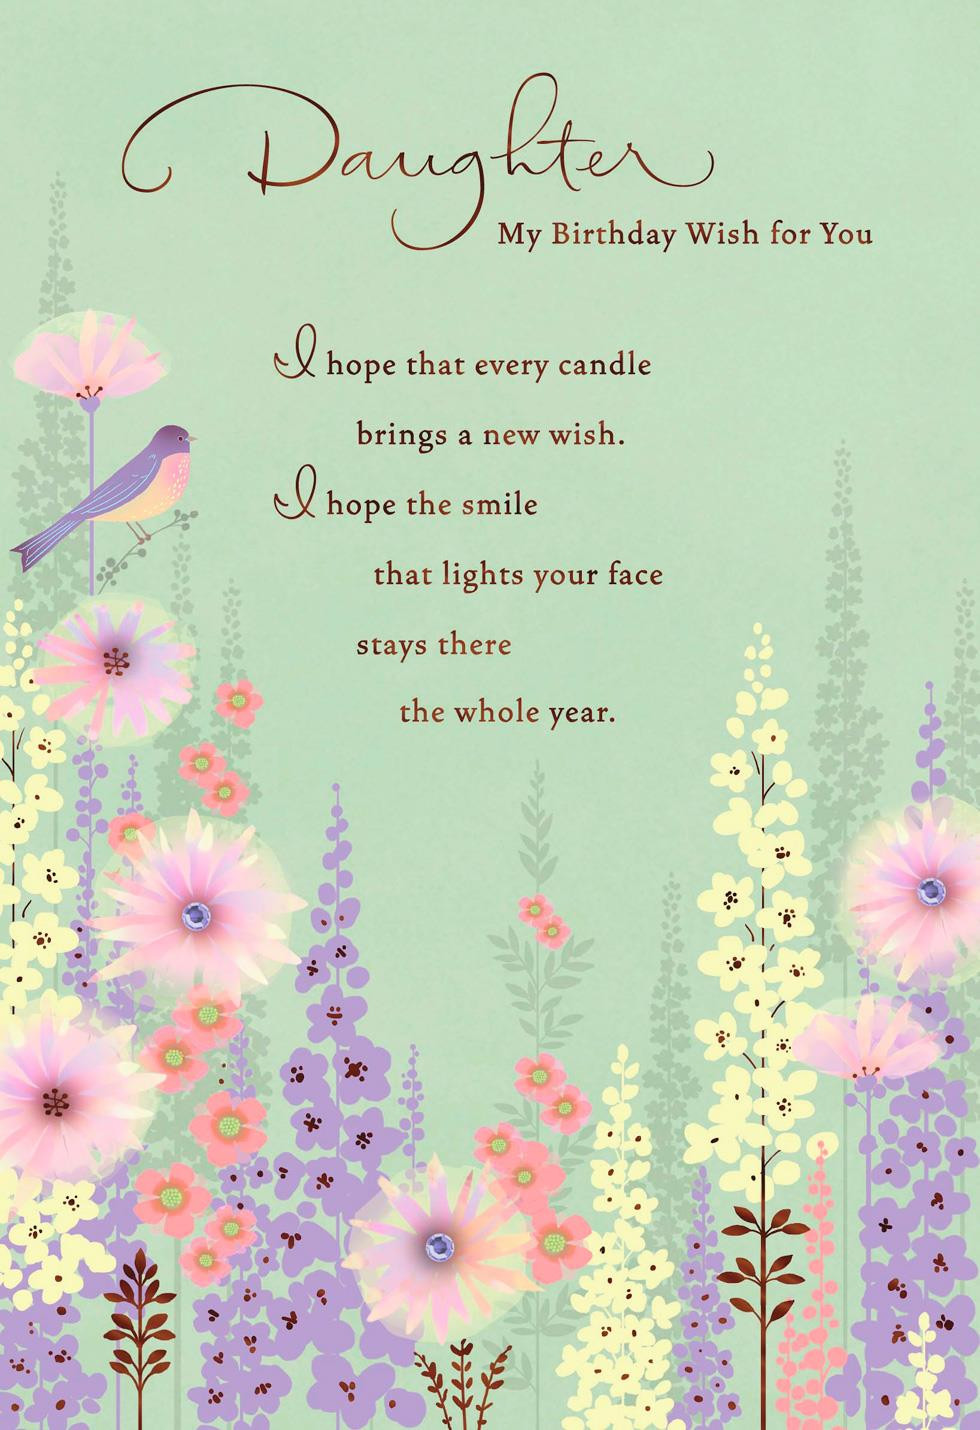 Hallmark Birthday Wishes
 Wishes Bird and Flowers Birthday Card for Daughter